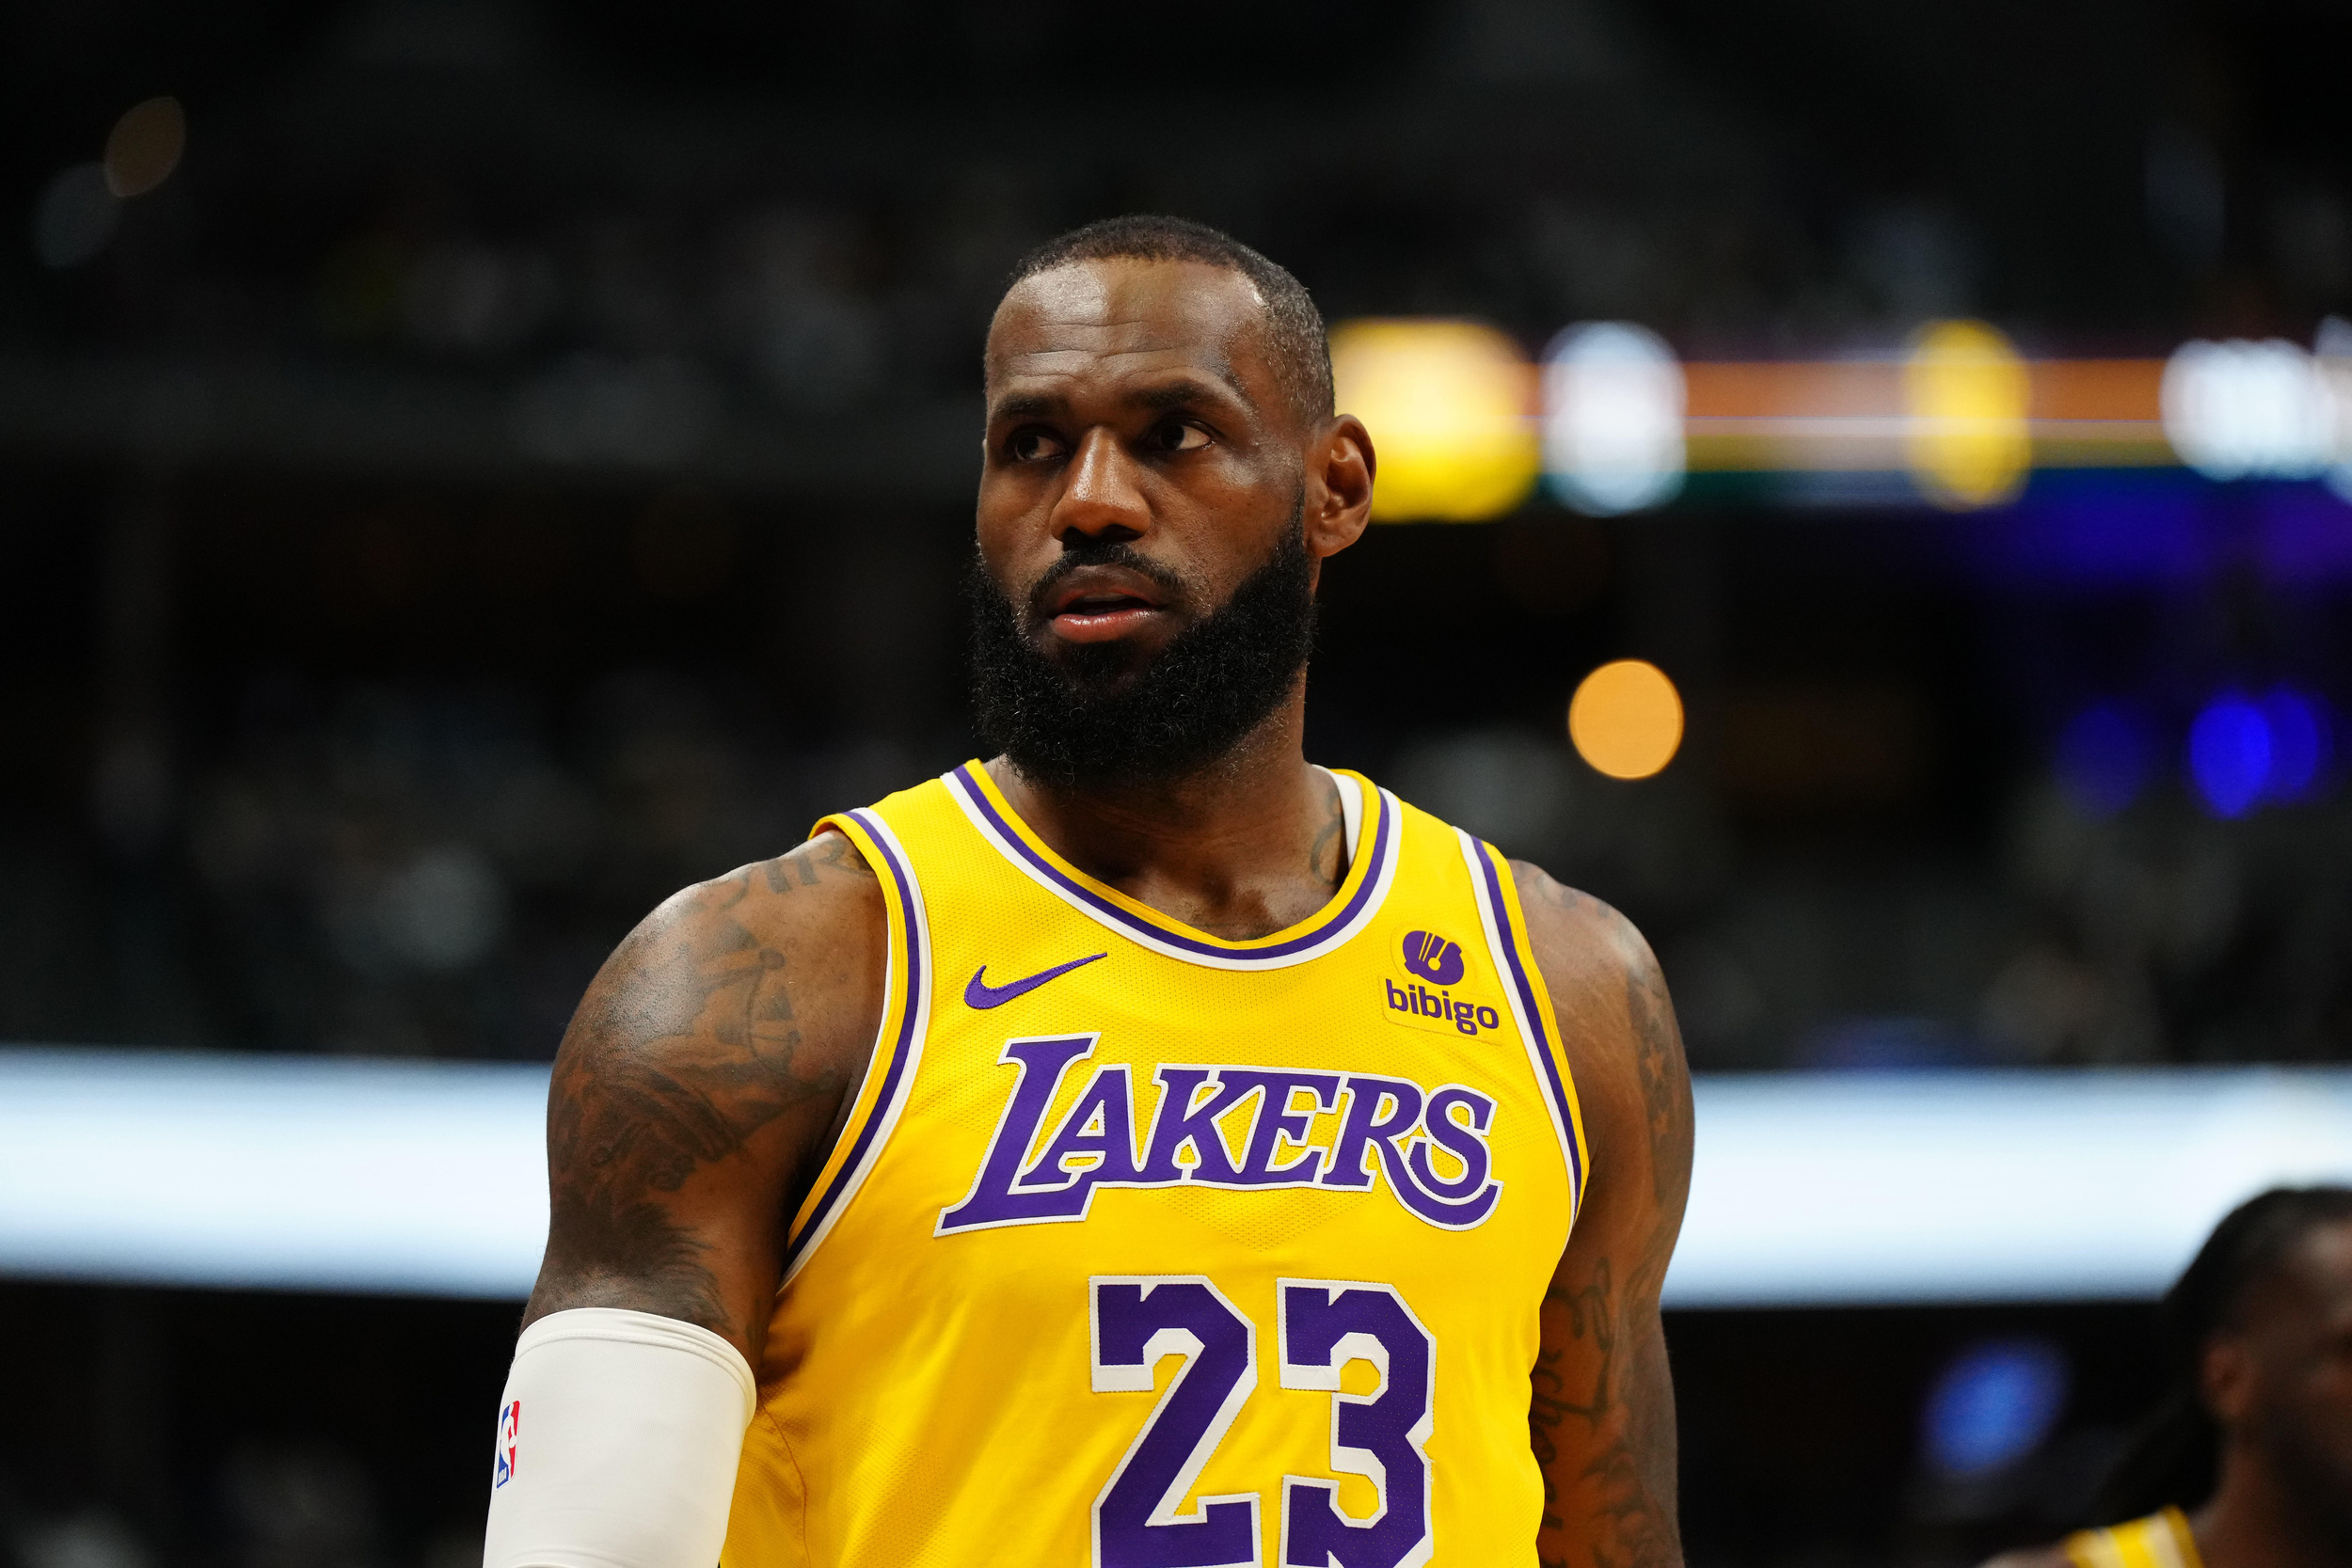 lebron james rues 'missed opportunities' against nuggets